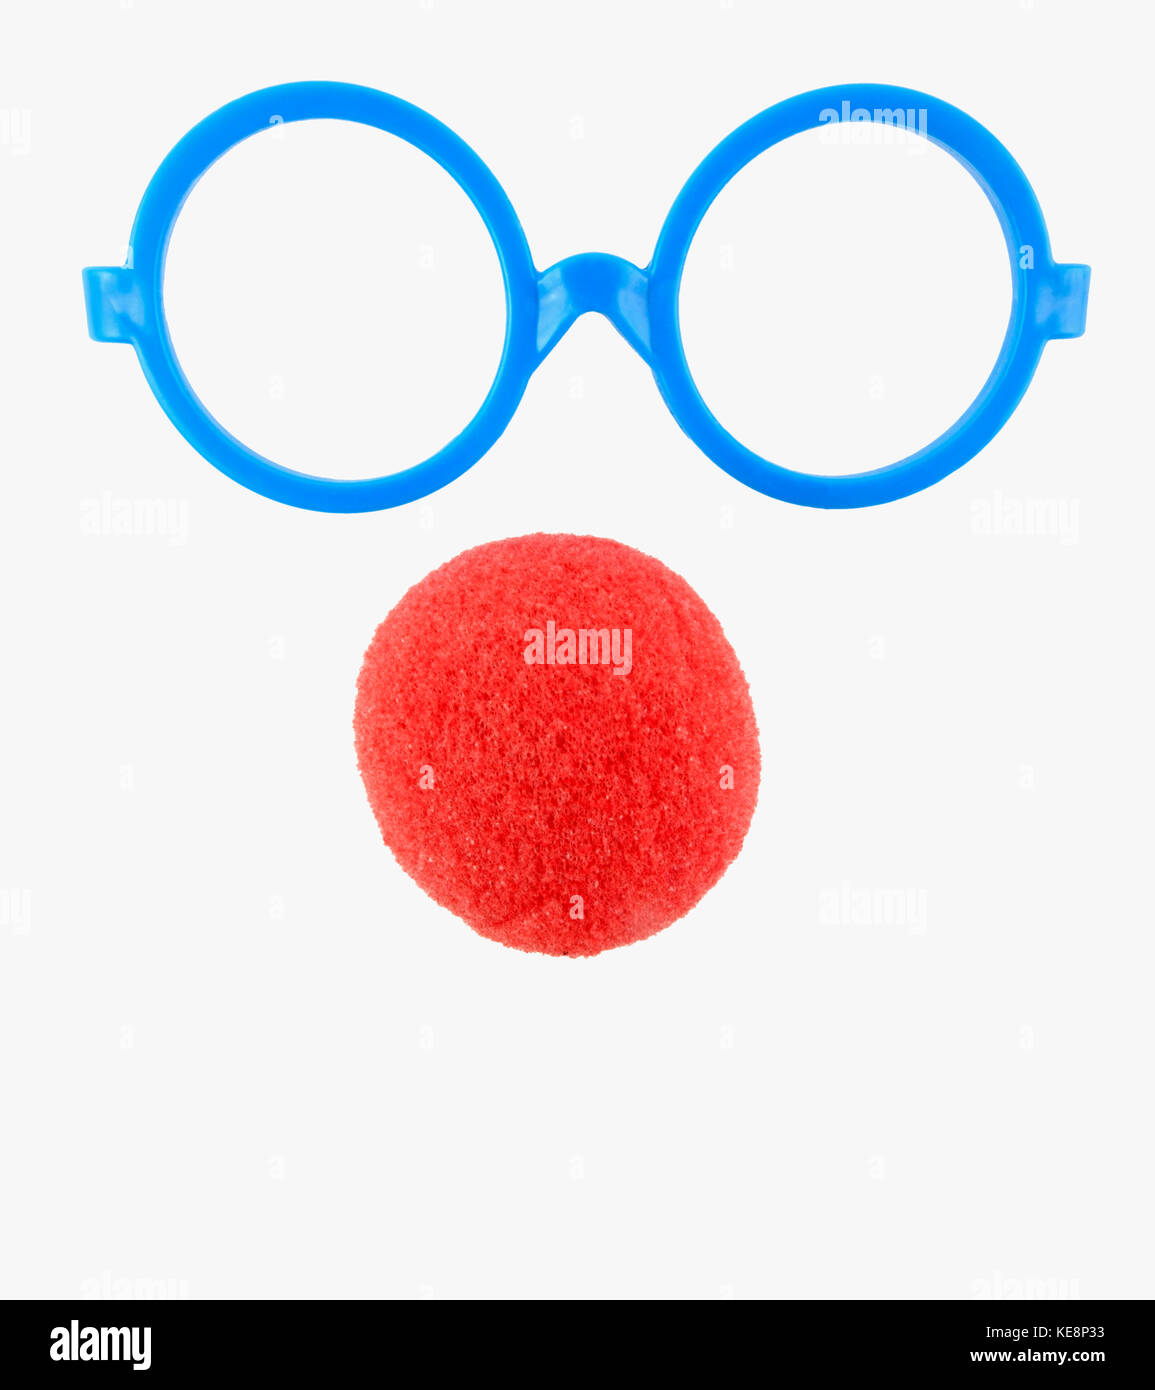 Simple blue plastic glasses frames and red foam clown nose. Add to and build your own silly, goofy face. Isolated. Stock Photo